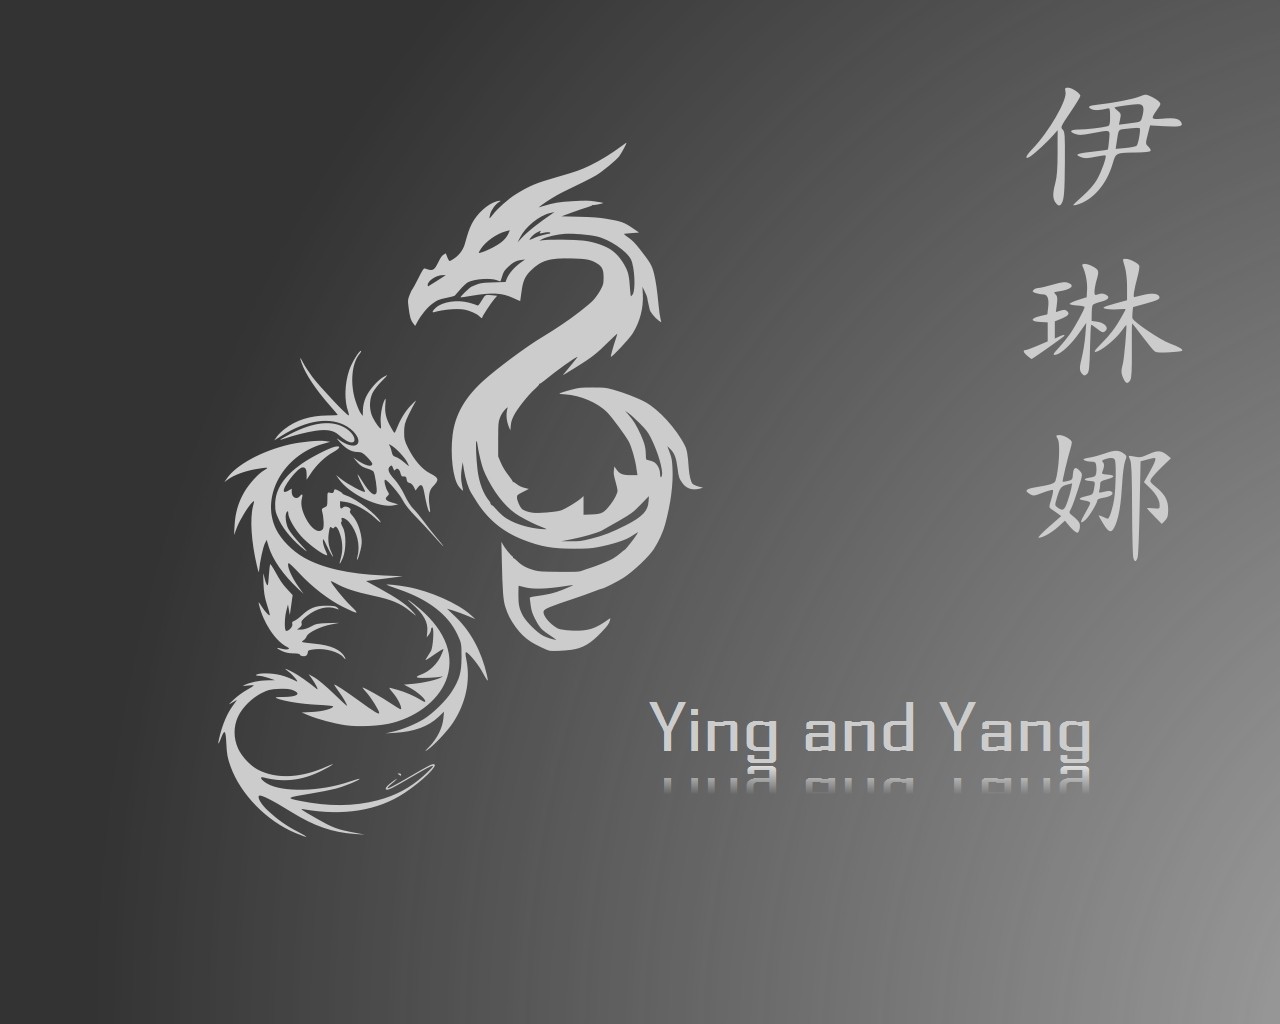 General 1280x1024 Yin and Yang Chinese monochrome dragon gray background gradient simple background typography Chinese dragon